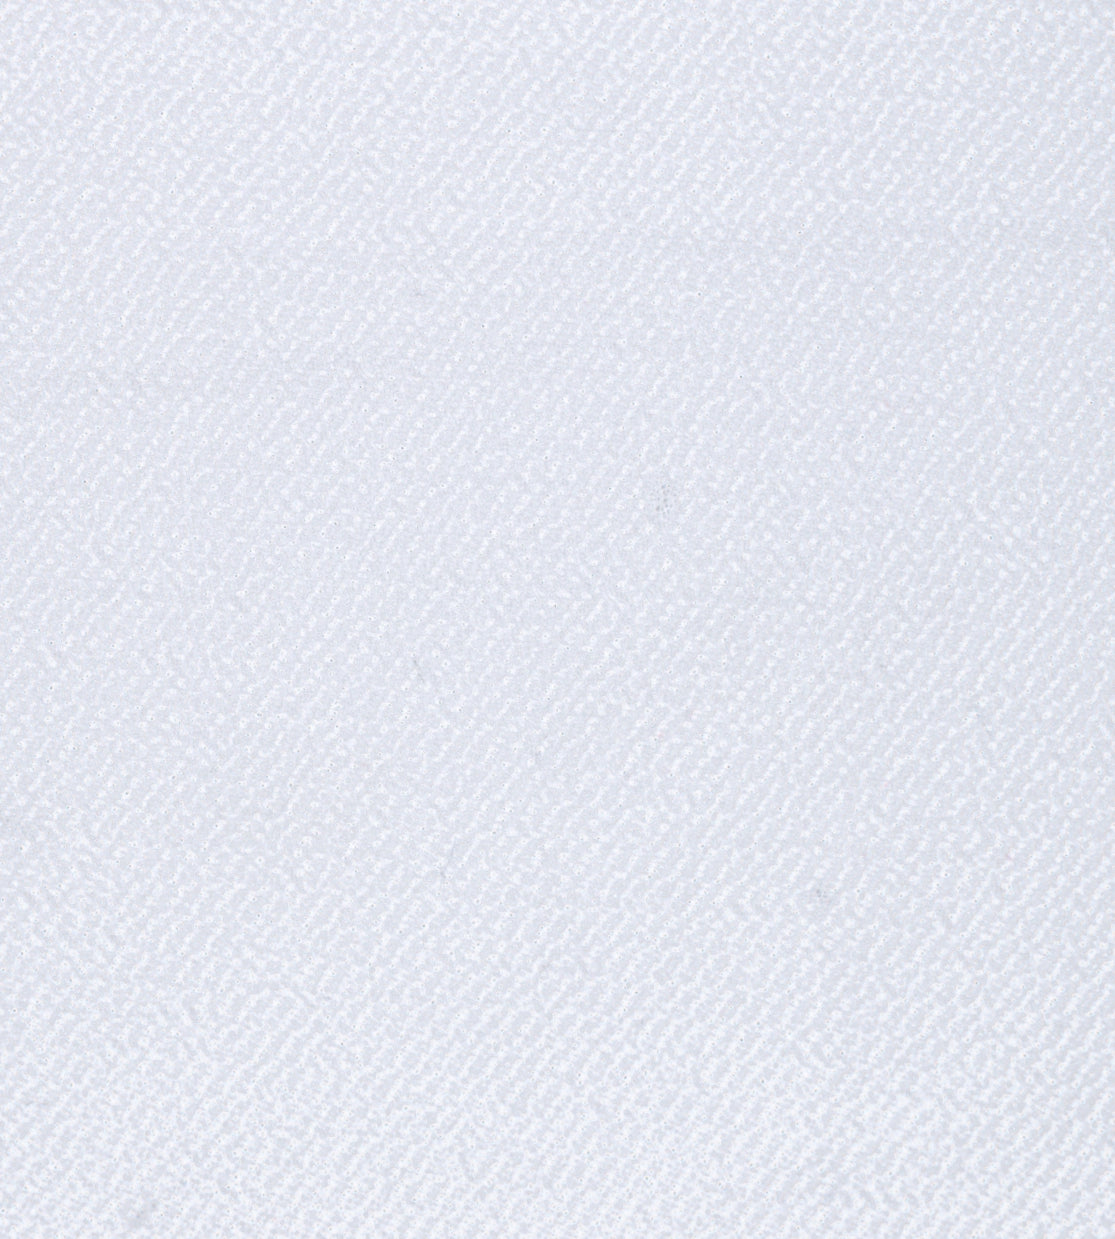 35005-01 White Polyester Plain Dyed 280g/yd 54" plain dyed polyester white woven Solid Color - knit fabric - woven fabric - fabric company - fabric wholesale - fabric b2b - fabric factory - high quality fabric - hong kong fabric - fabric hk - acetate fabric - cotton fabric - linen fabric - metallic fabric - nylon fabric - polyester fabric - spandex fabric - chun wing hing - cwh hk - fabric worldwide ship - 針織布 - 梳織布 - 布料公司- 布料批發 - 香港布料 - 秦榮興